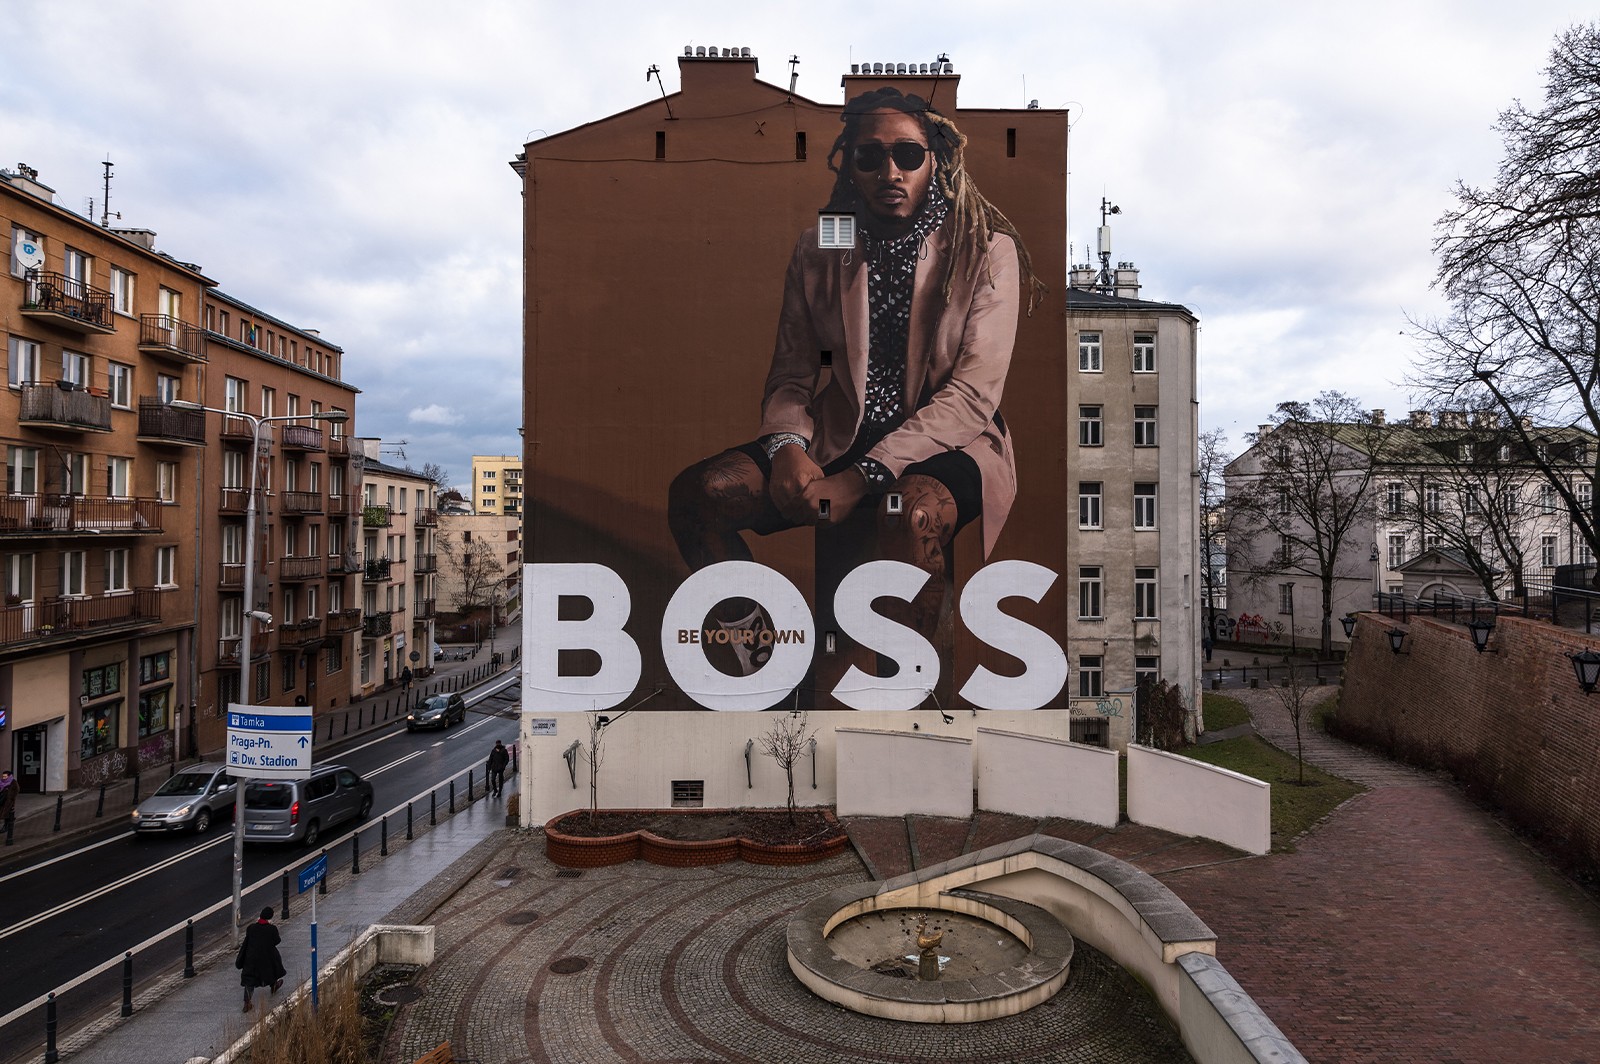 Artistic BOSS mural in Warsaw | BE YOUR OWN BOSS | Portfolio